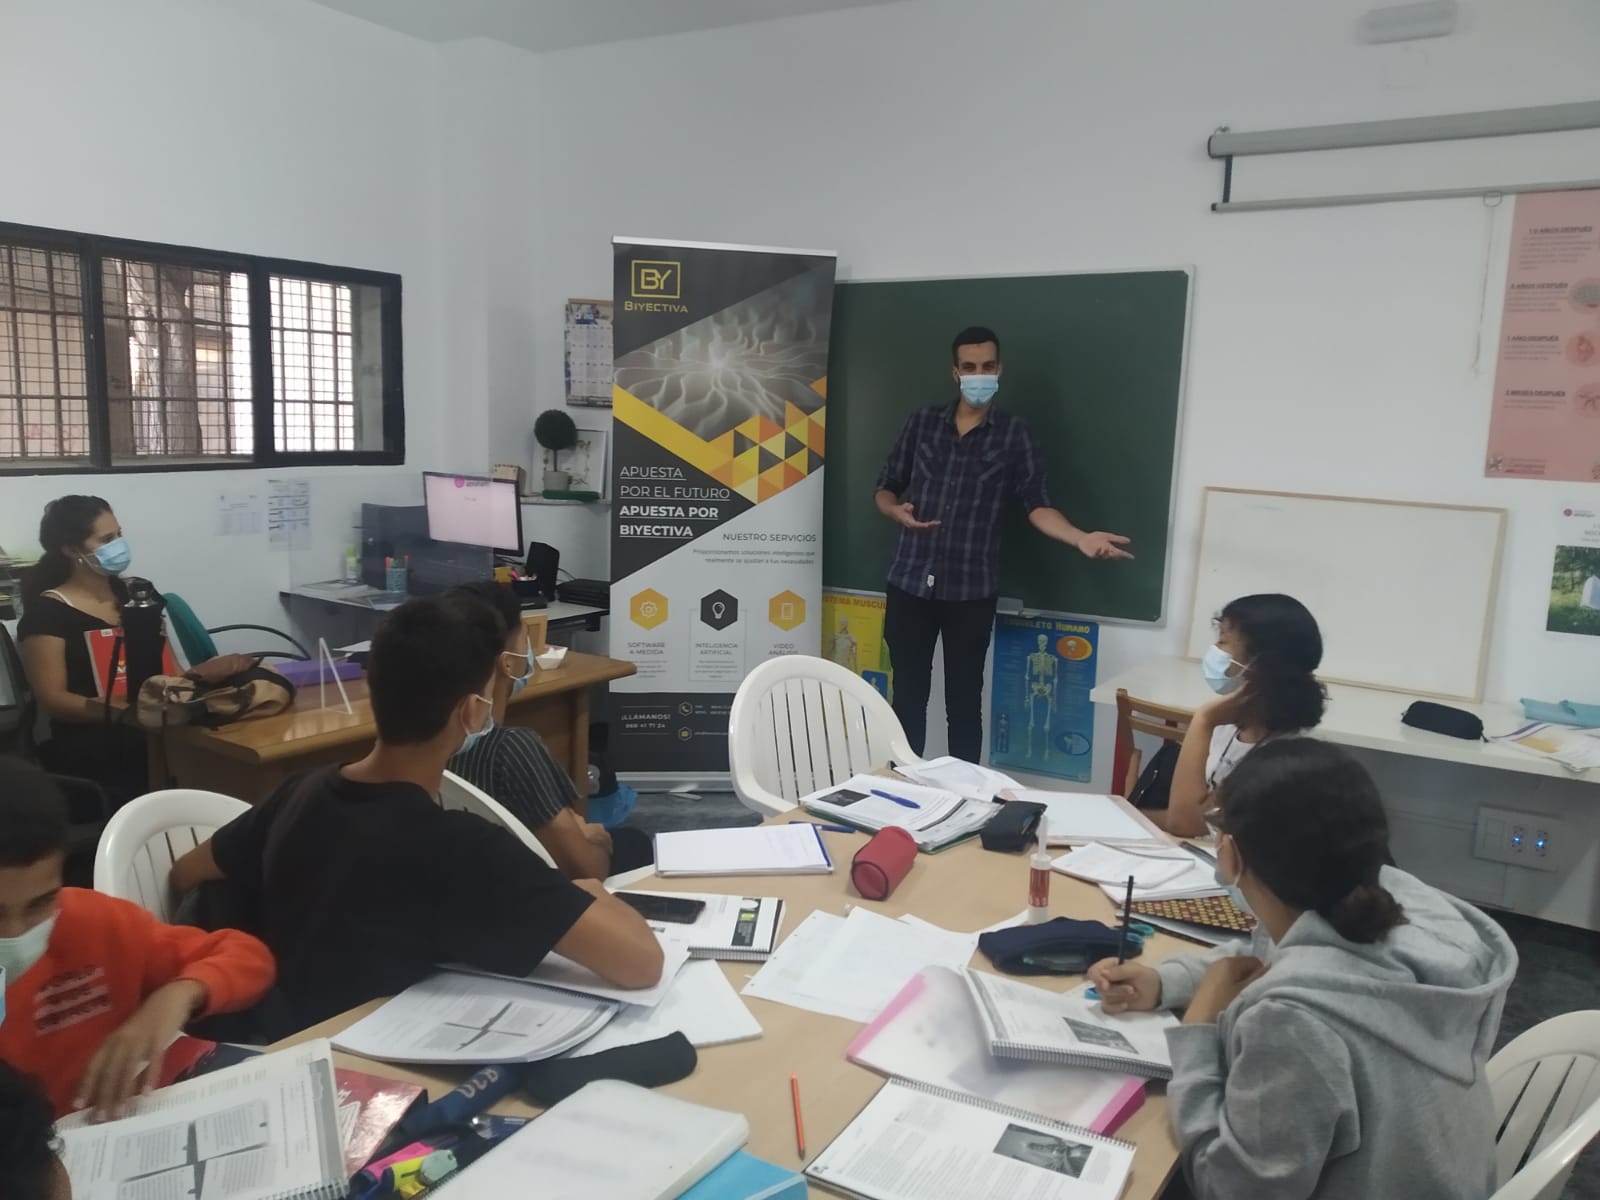 Proyecto Abraham seeks the solidarity of the region so that boys and girls without resources have access to reinforcement classes - Biyectiva Technology